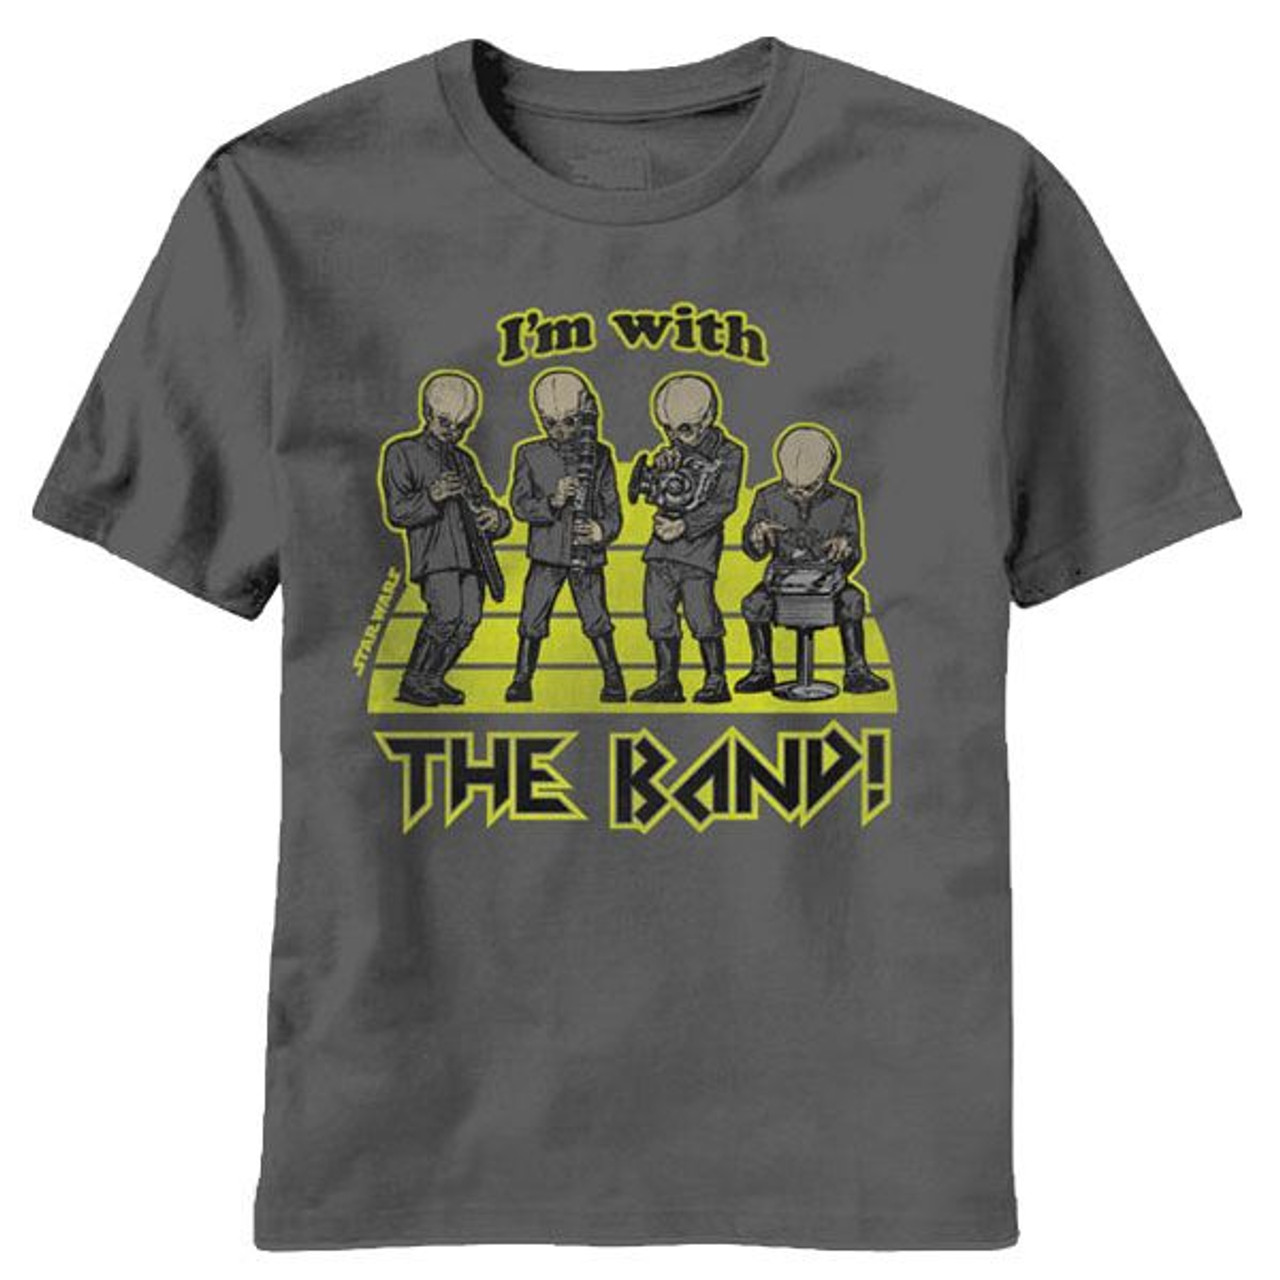 Mad Engine Star Wars Band T-Shirt* Size: XX-Large Gray